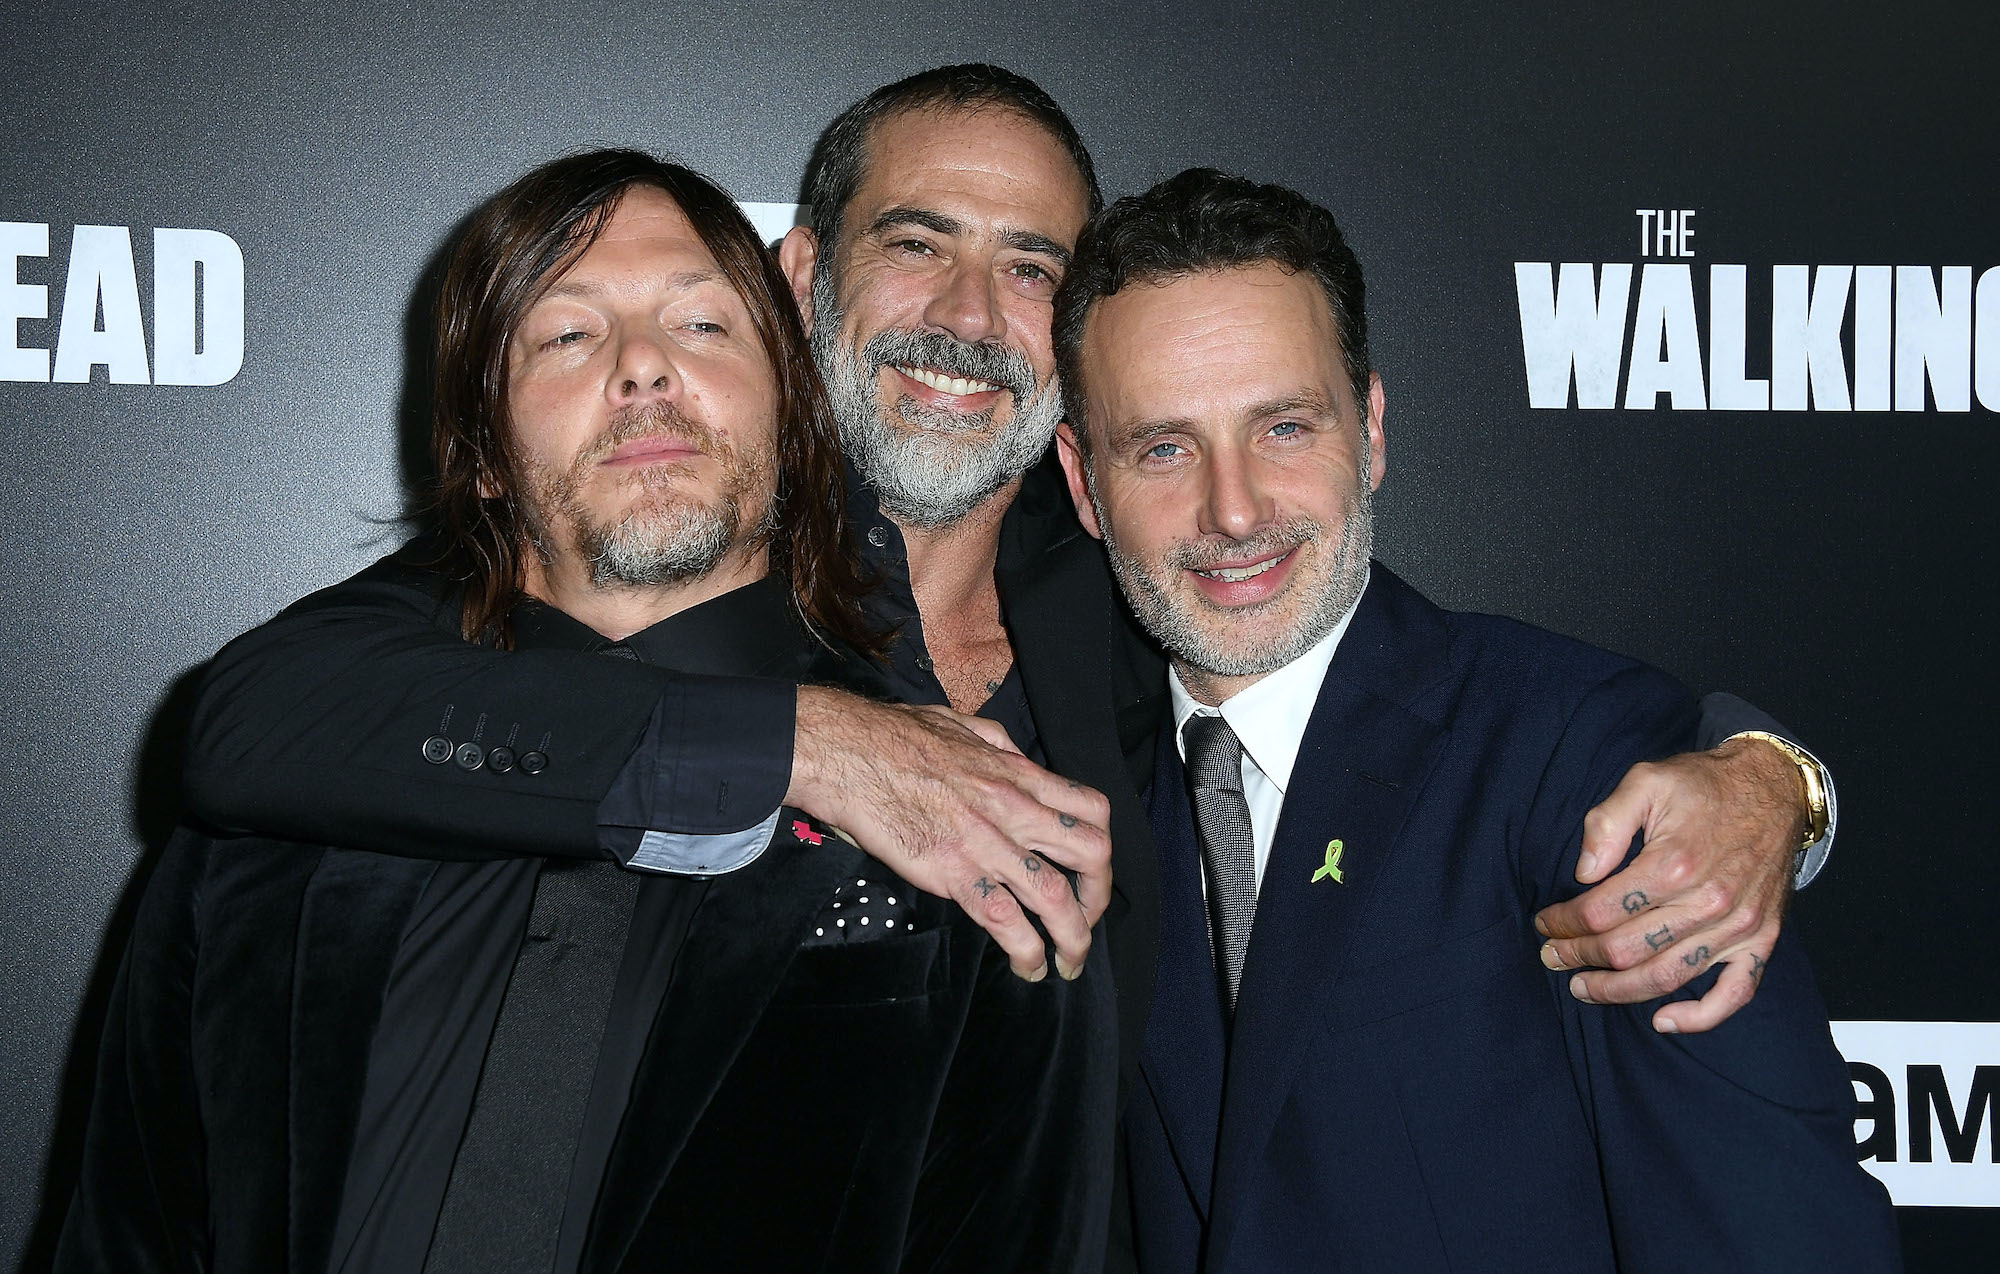 Cast members of 'The Walking Dead' smiling in front of a black background